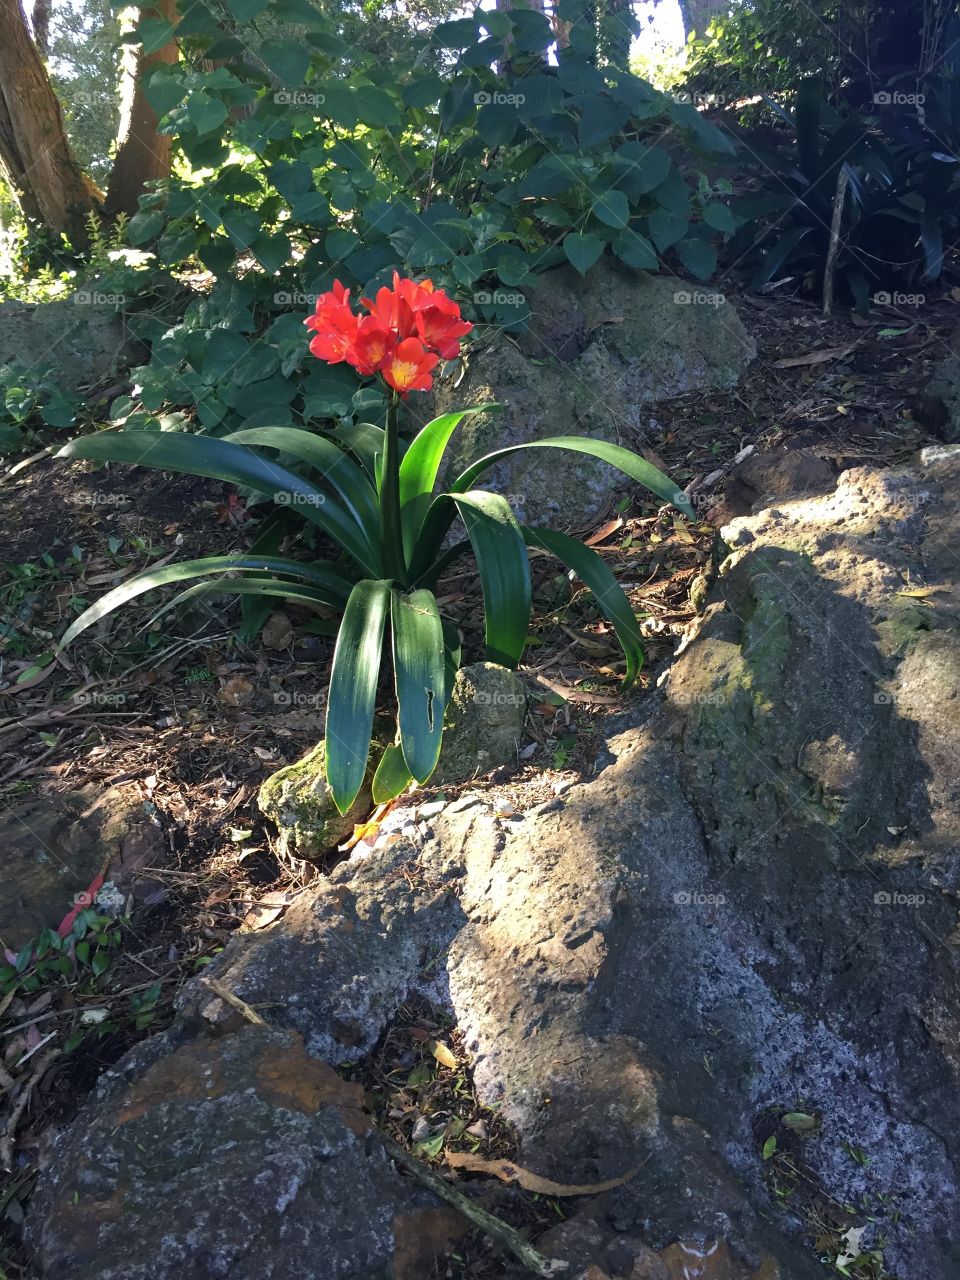 Possibly a Daylily plant with gorgeous red petals on the edge of a garden path